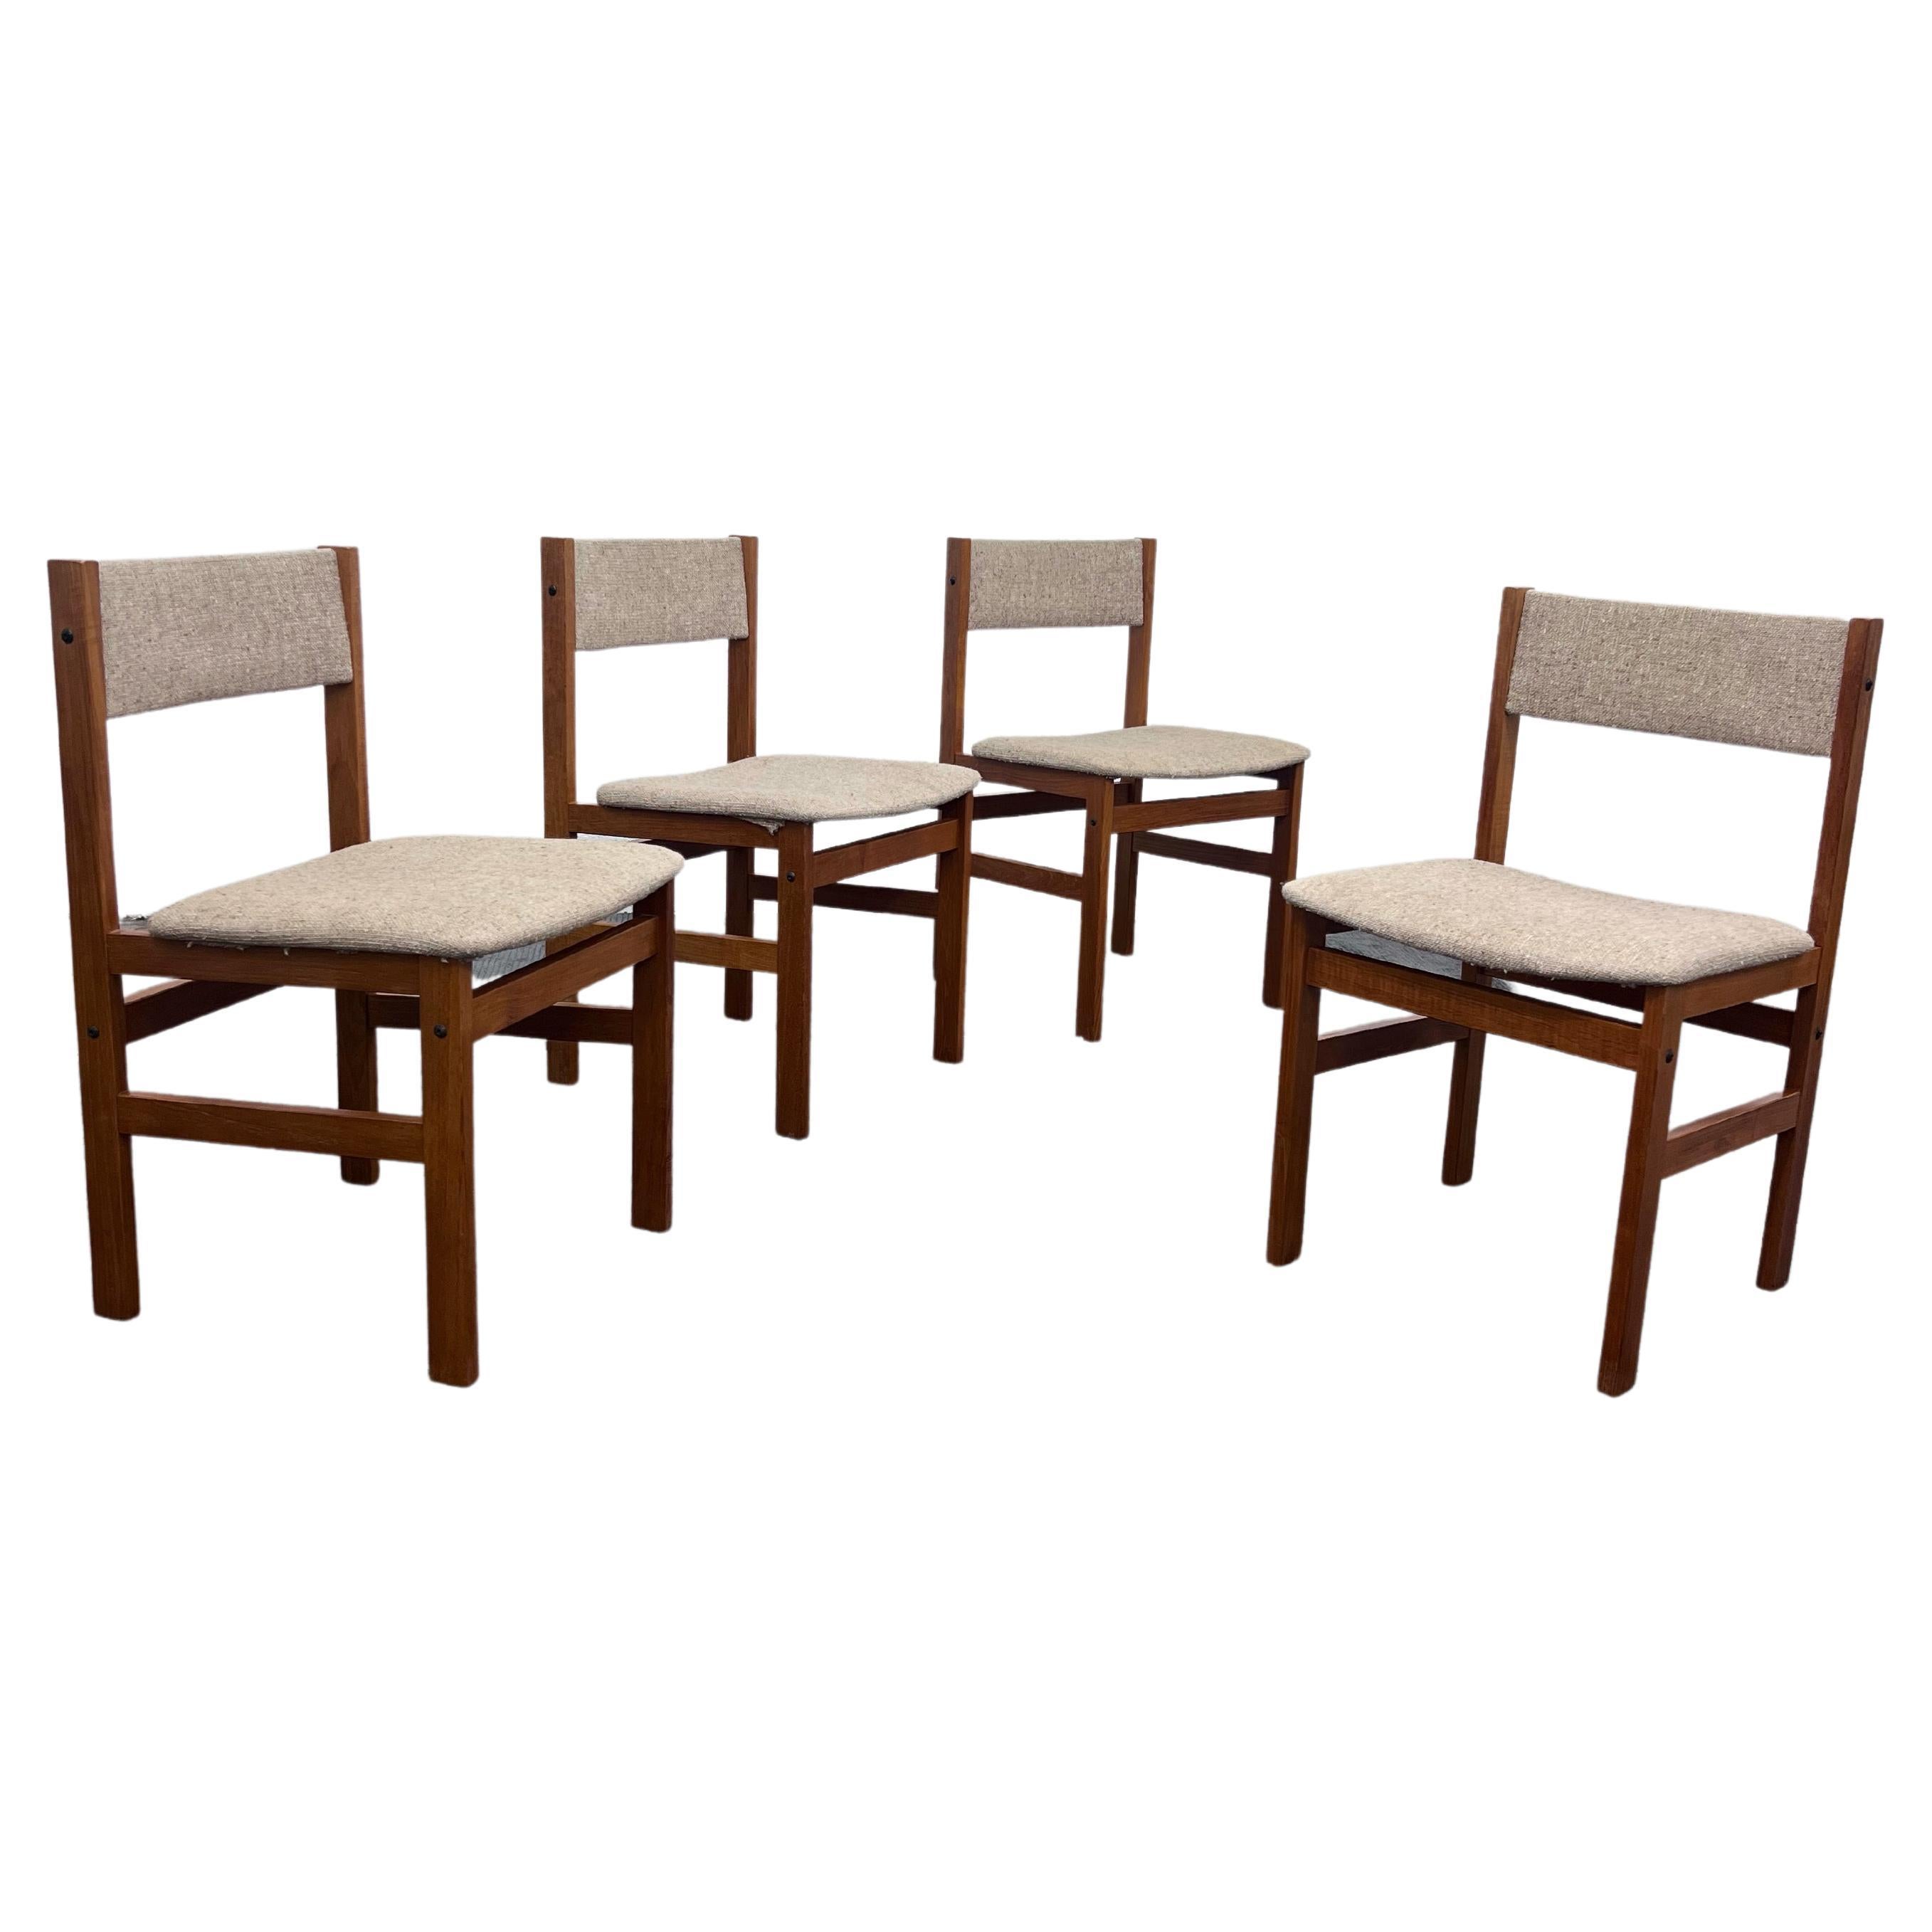 Vintage Mid century modern dining chairs by Spøttrup, set of 4 